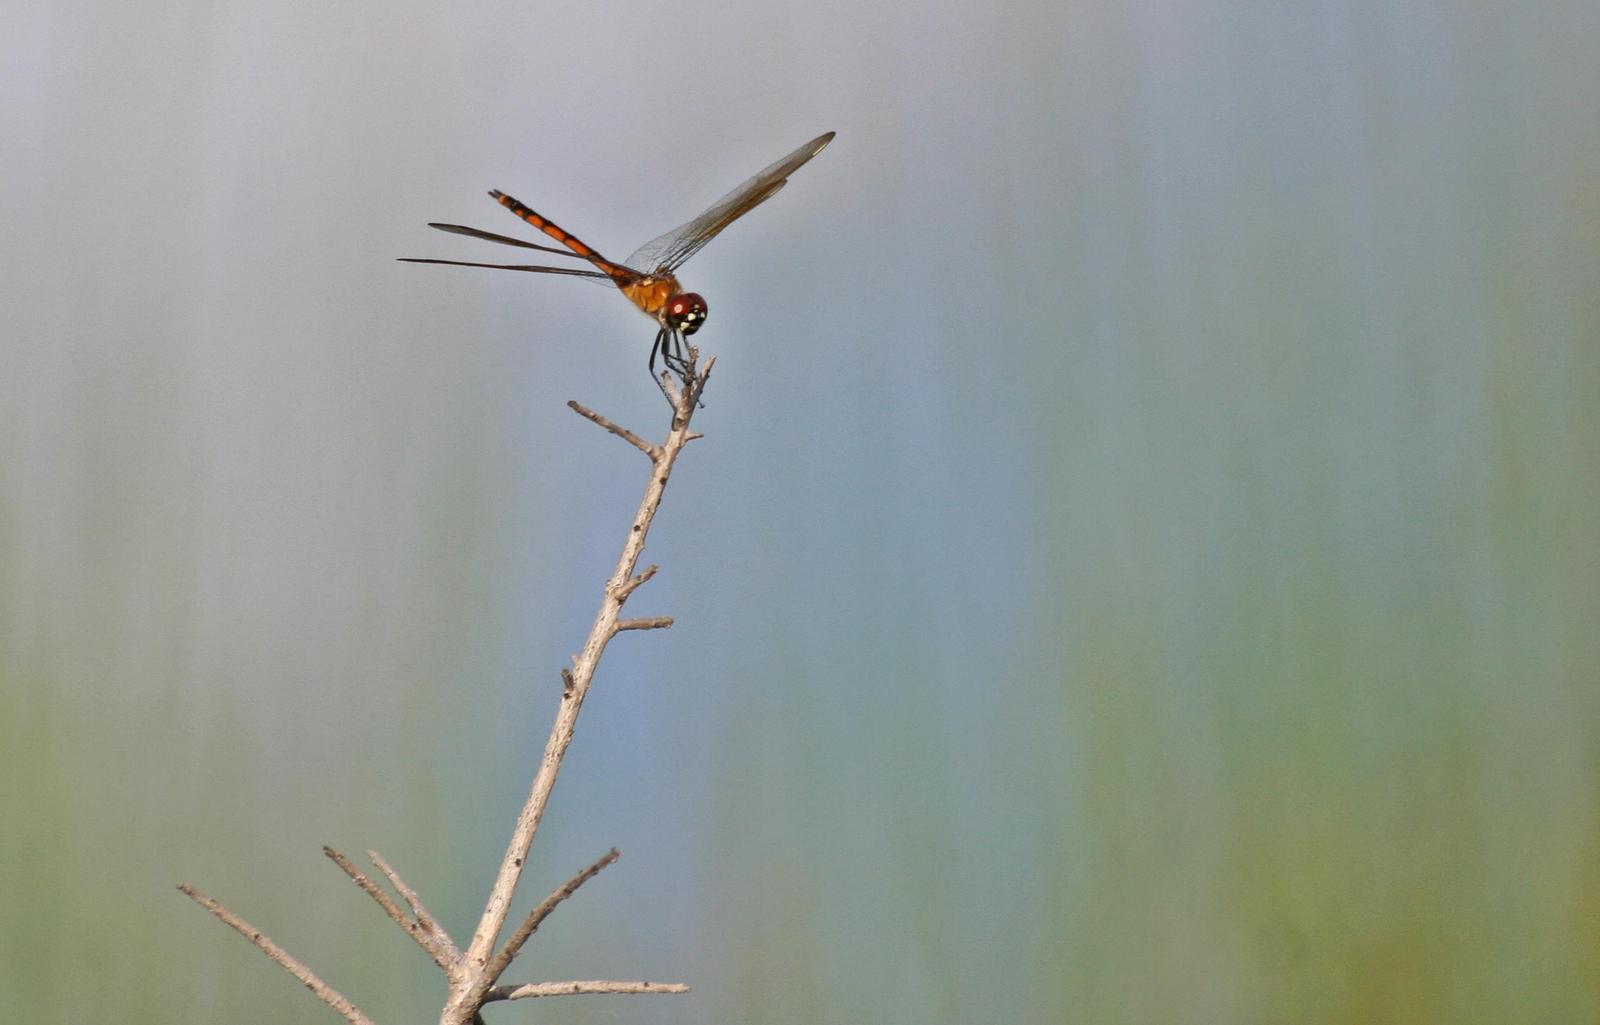 Four-spotted Pennant Photo by Andrew Theus